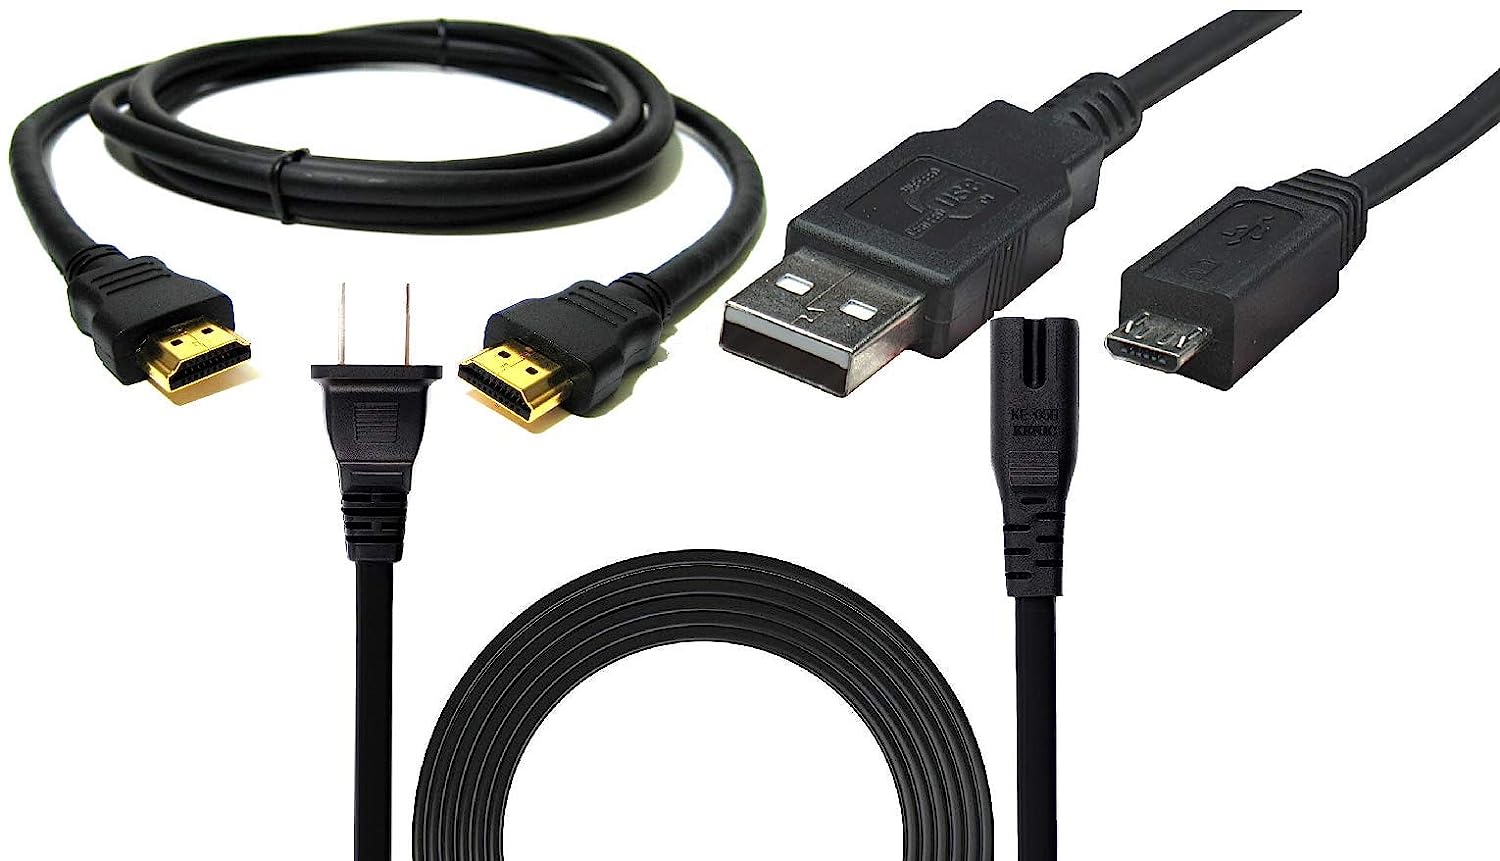 BRENDEZ Replacement Set of Cables,- HDMI Cable with [...]